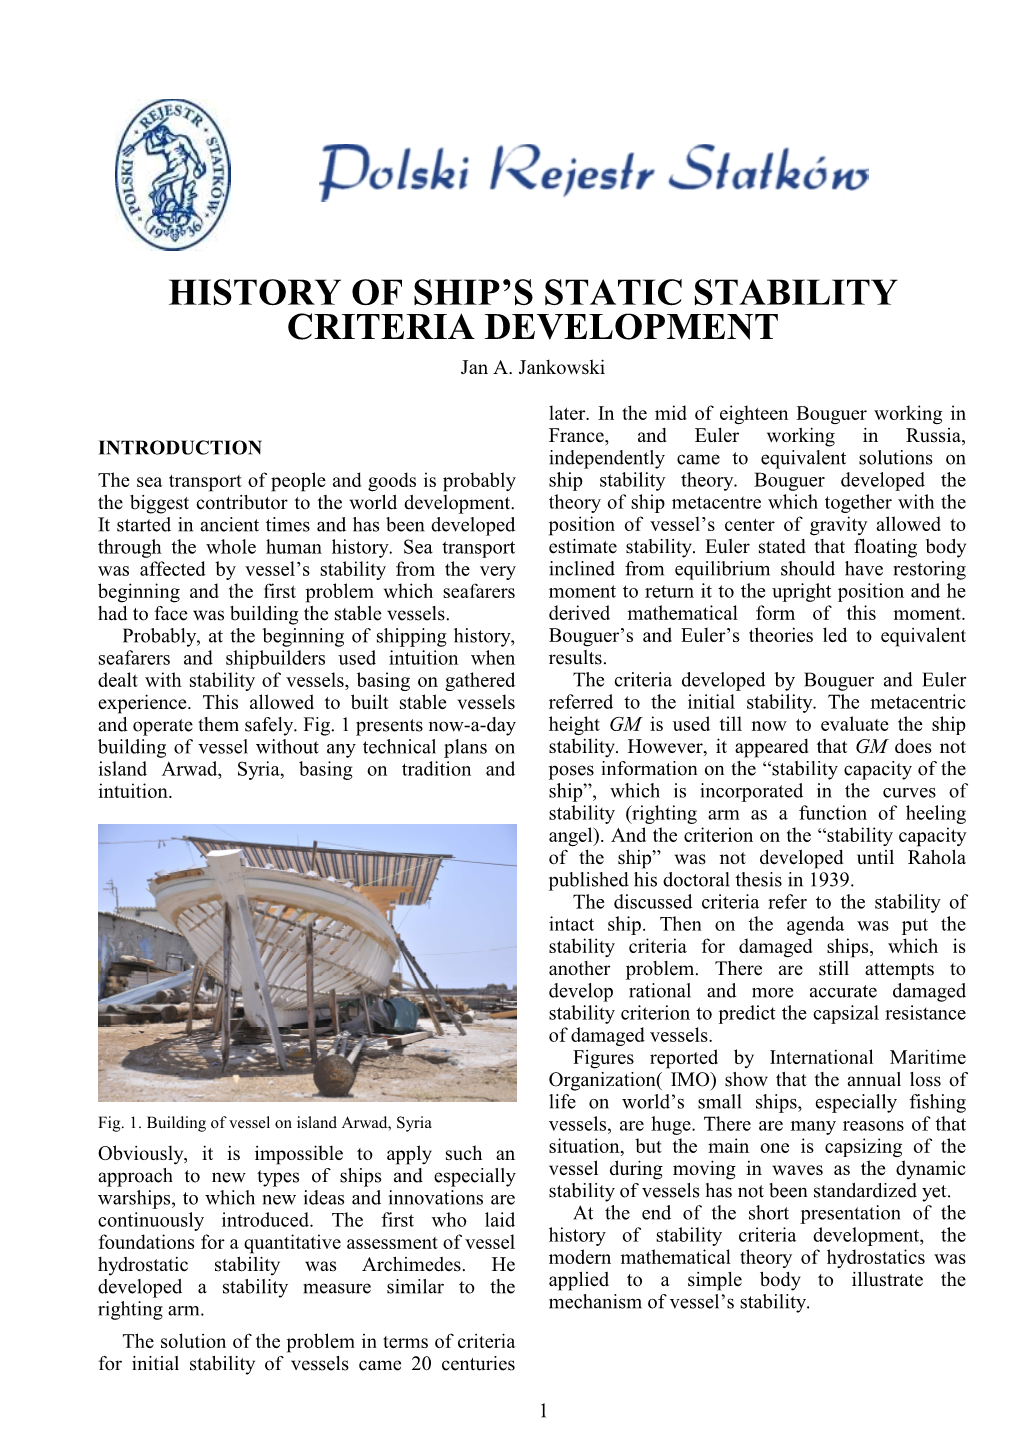 History of Stability Criteria Development, the Hydrostatic Stability Was Archimedes